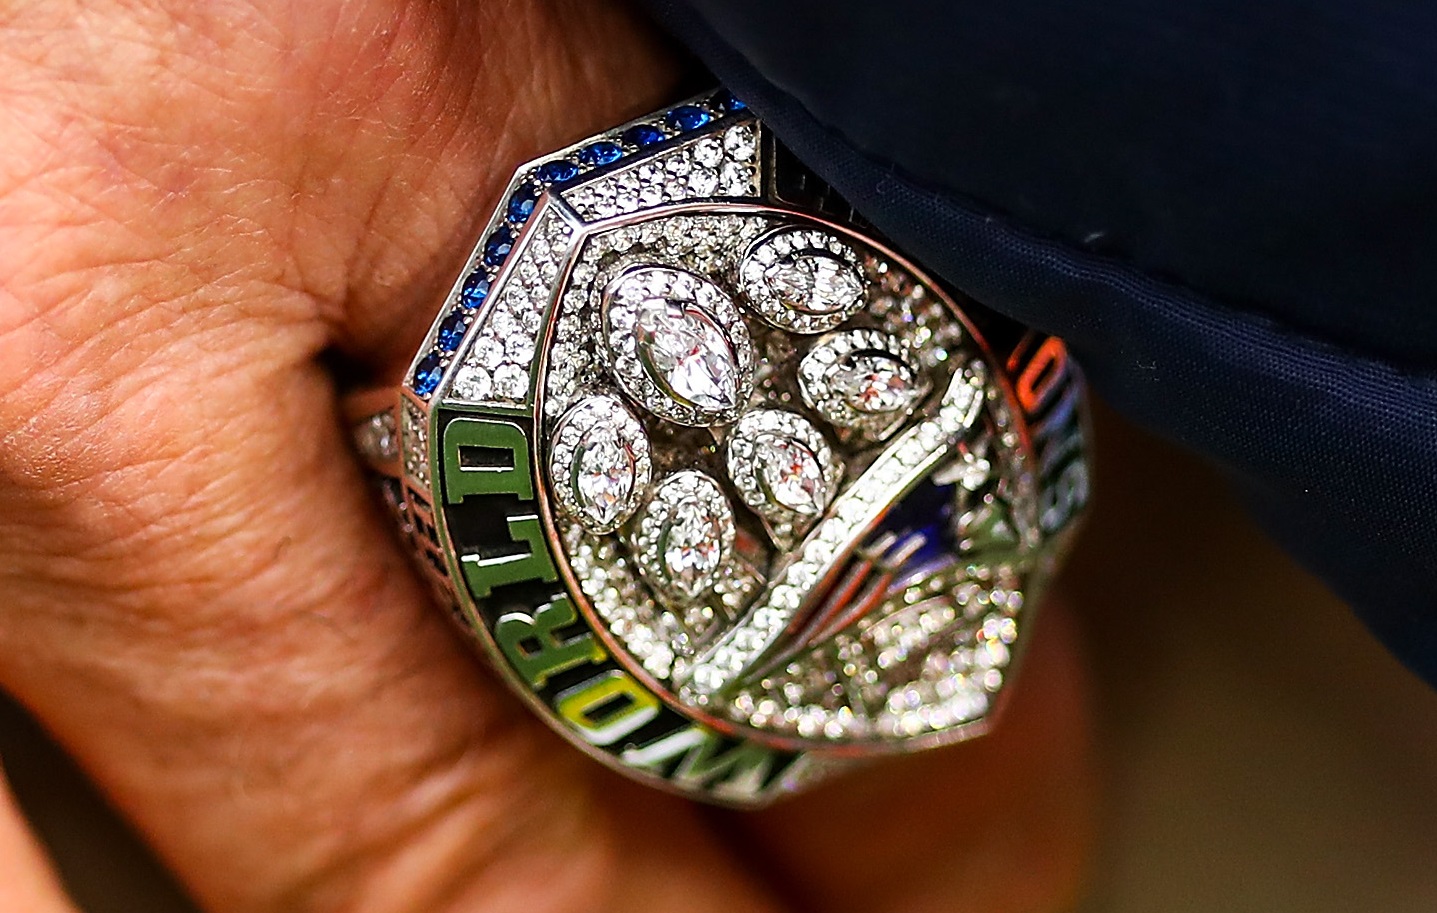 The New England Patriots are believed to have presented about 150 Super Bowl 53 rings to players, coaches, and staff. | Adam Glanzman/Getty Images